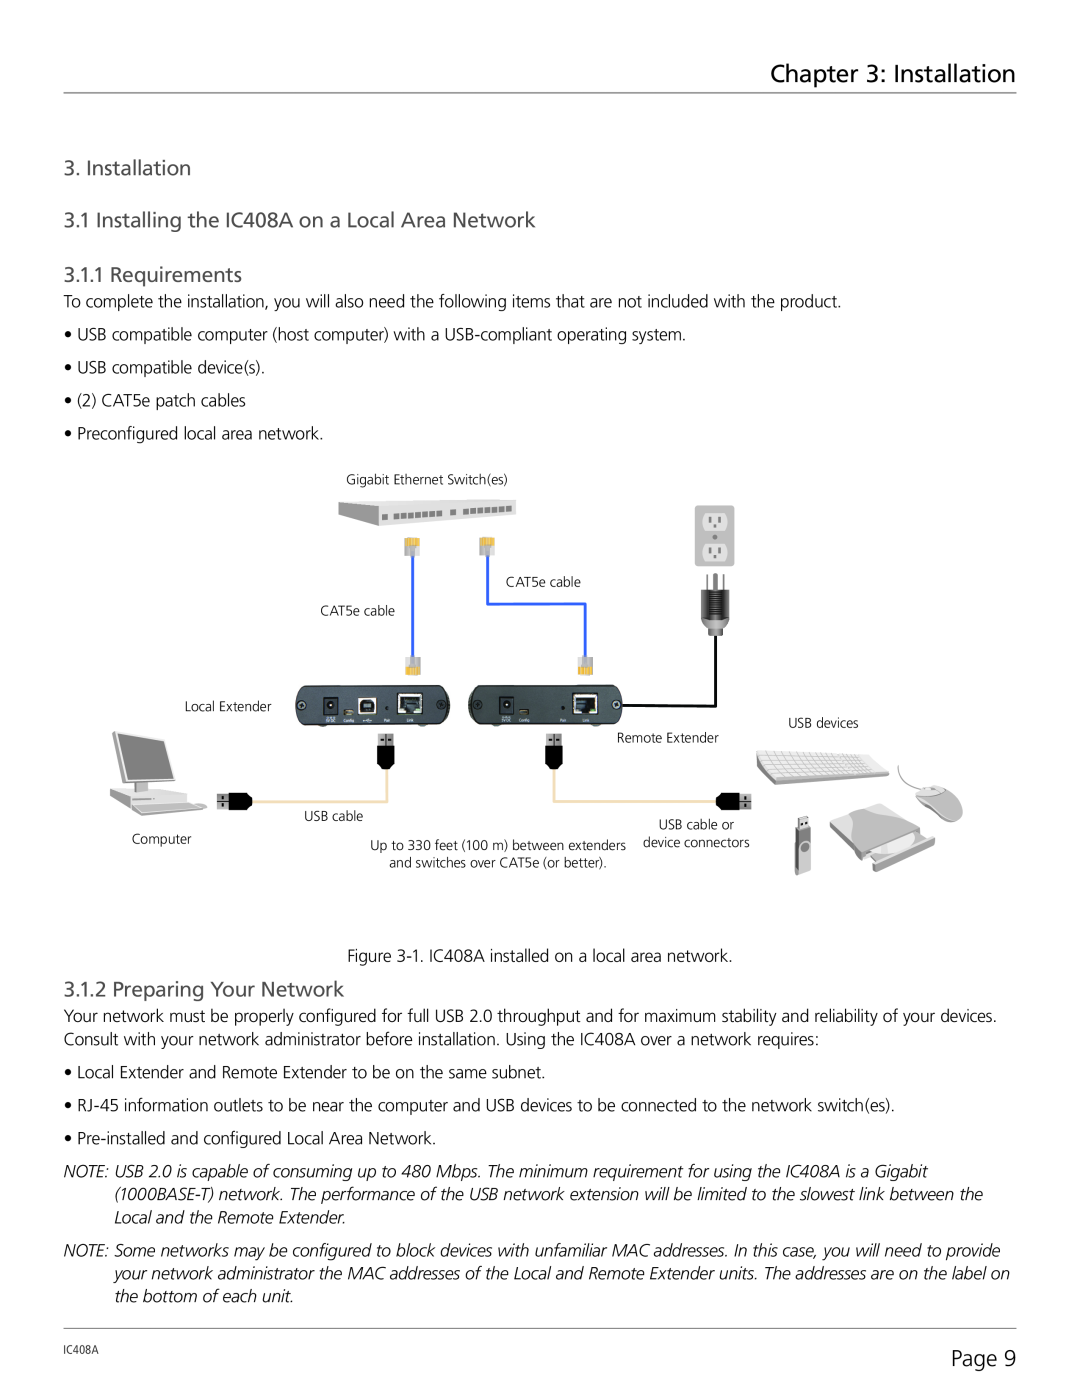 Black Box 4-Port USB 2.0 Extender over LAN manual Installation 3.1 Installing the IC408A on a Local Area Network, Page 